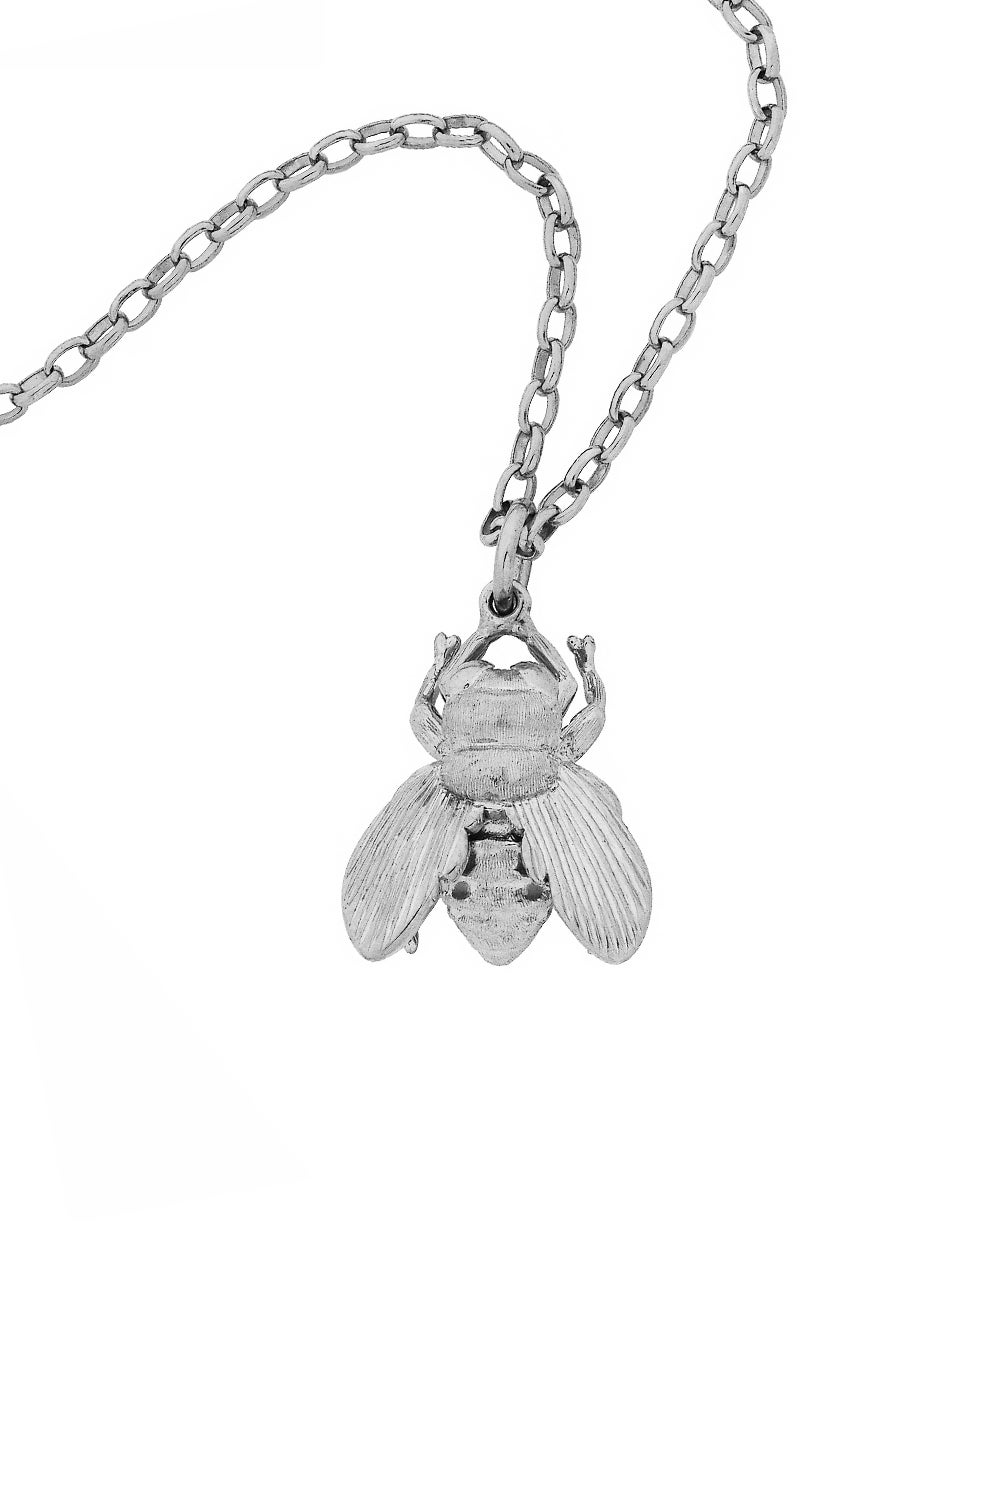 Sterling Silver Bumble Bee Pendant Necklace, Honeybee Pendant Necklace, Bee  Necklace, Realistic Bee Charm Necklace, Bee Necklace - Etsy